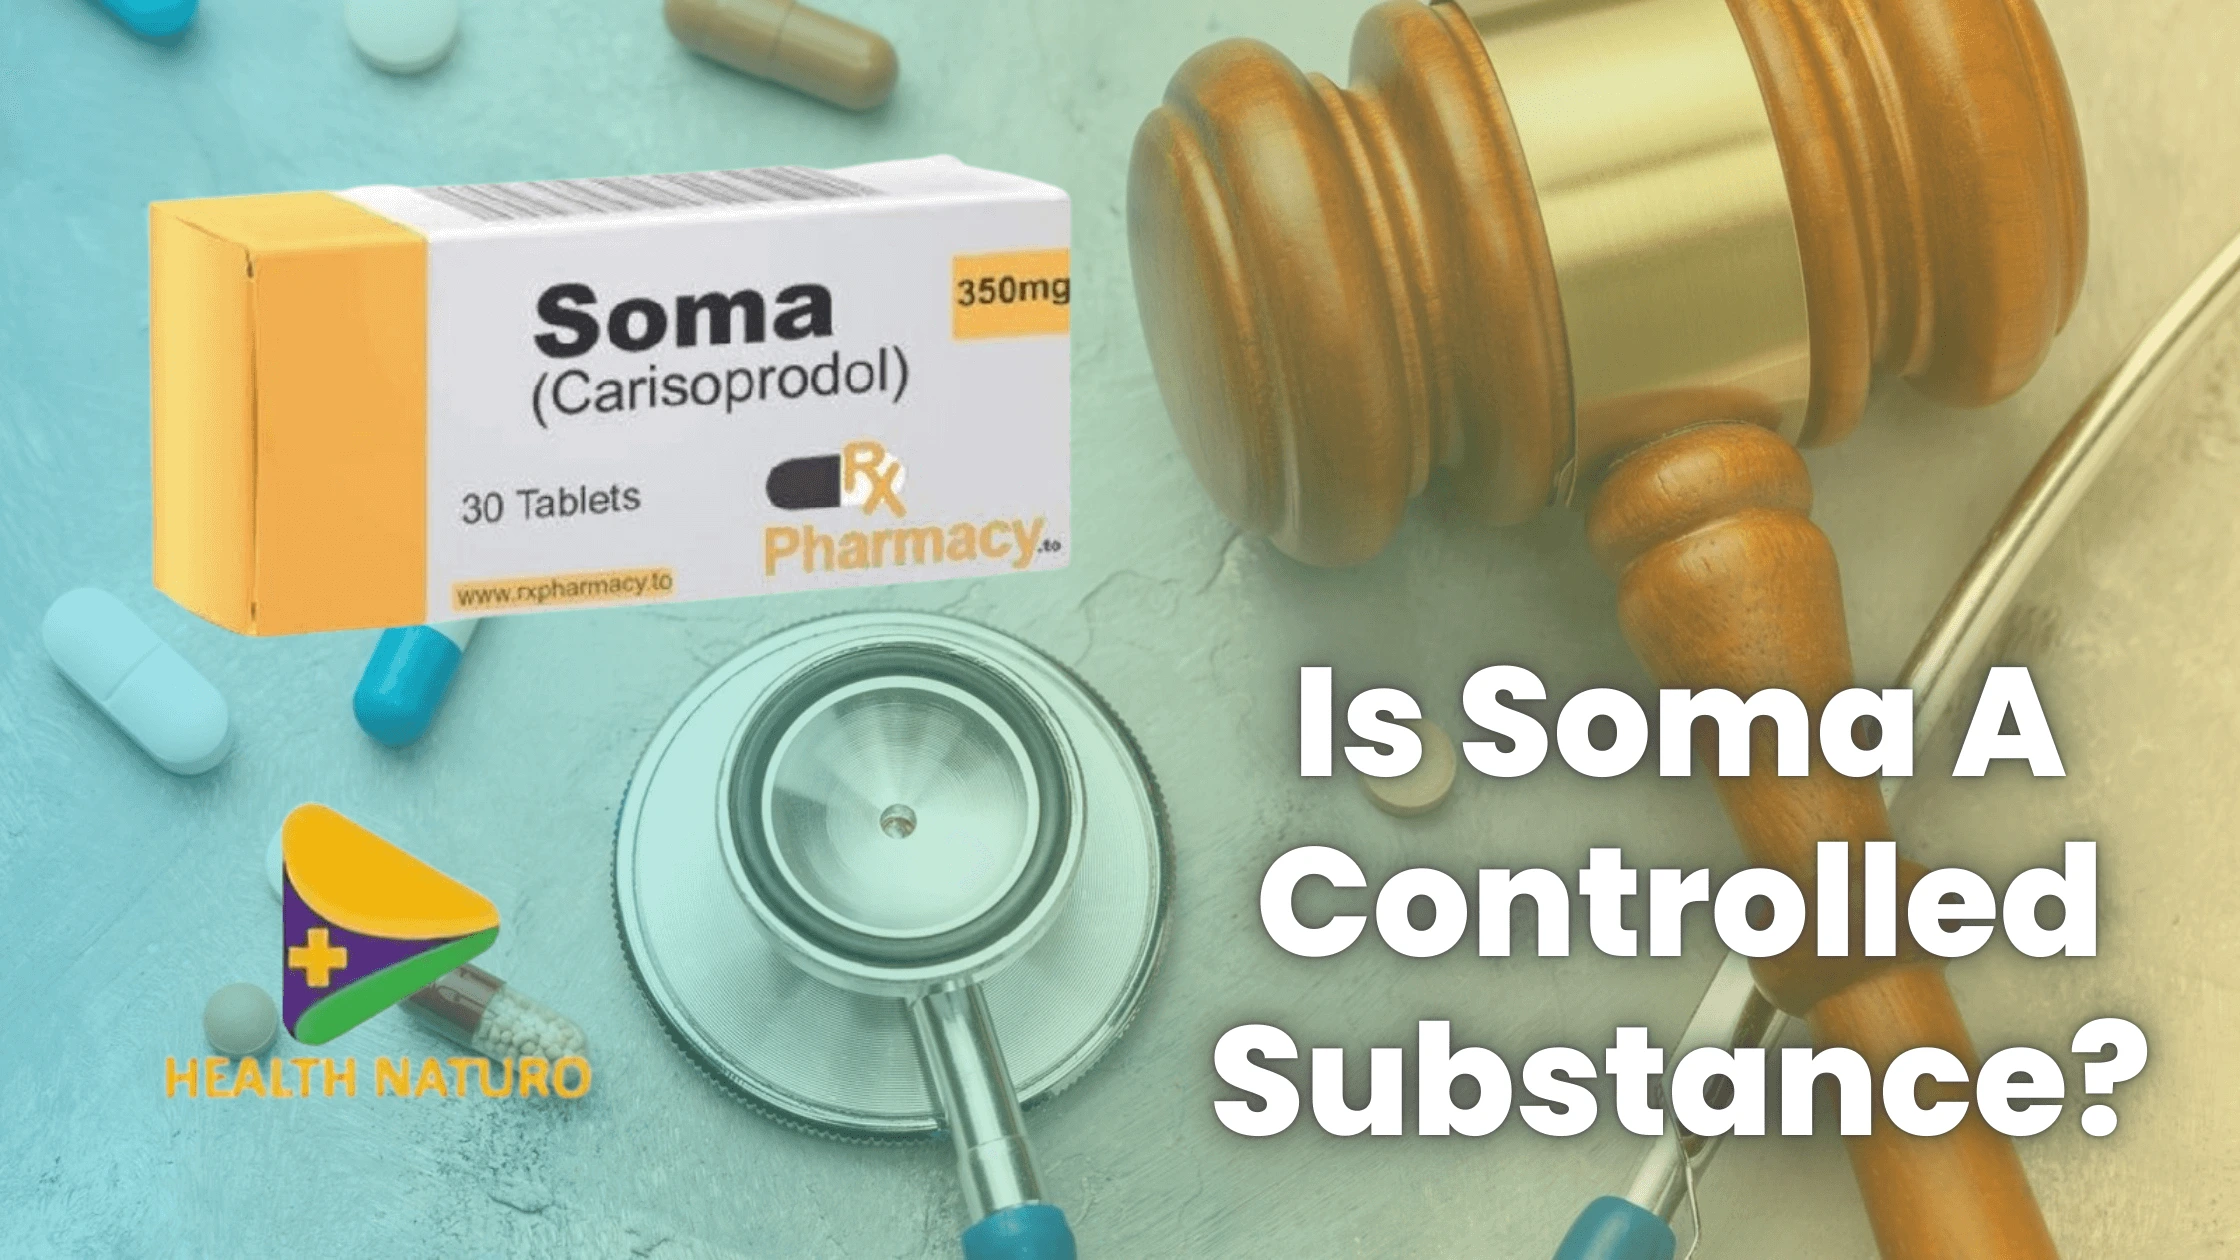 Soma classification: Is Soma A Controlled Substance?